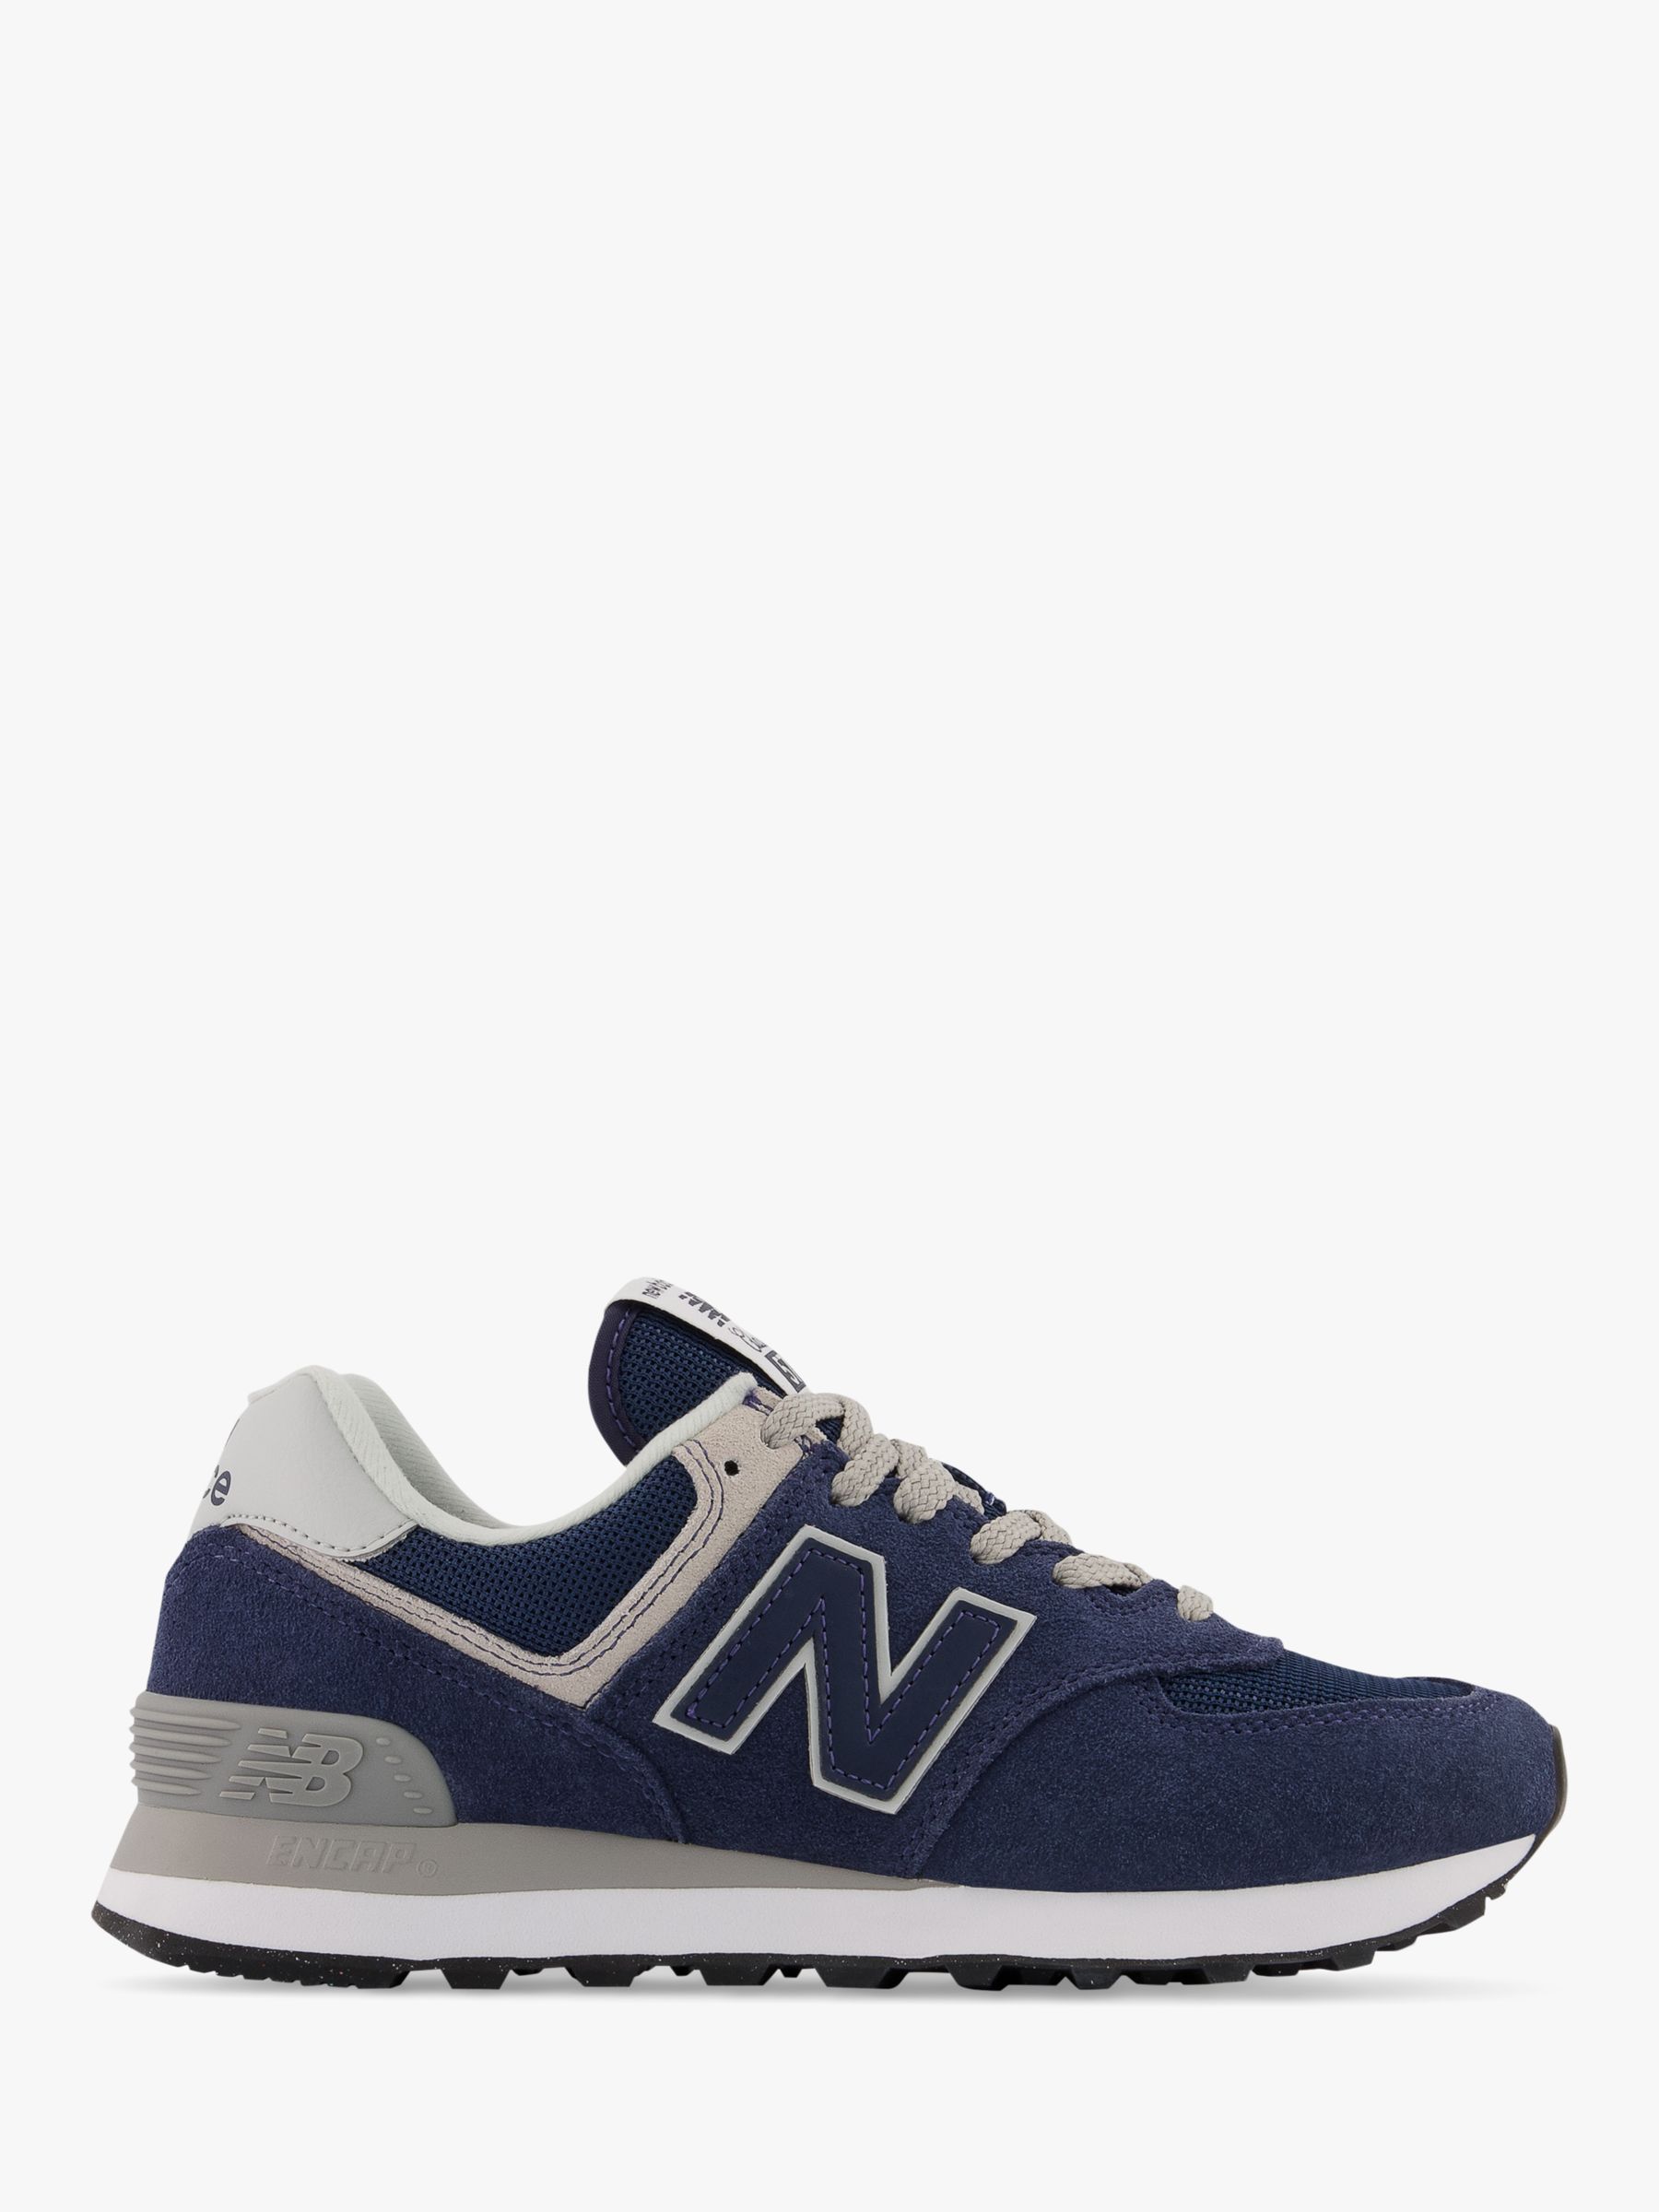 Women's Shoes - Trainers & Sneakers - New Balance